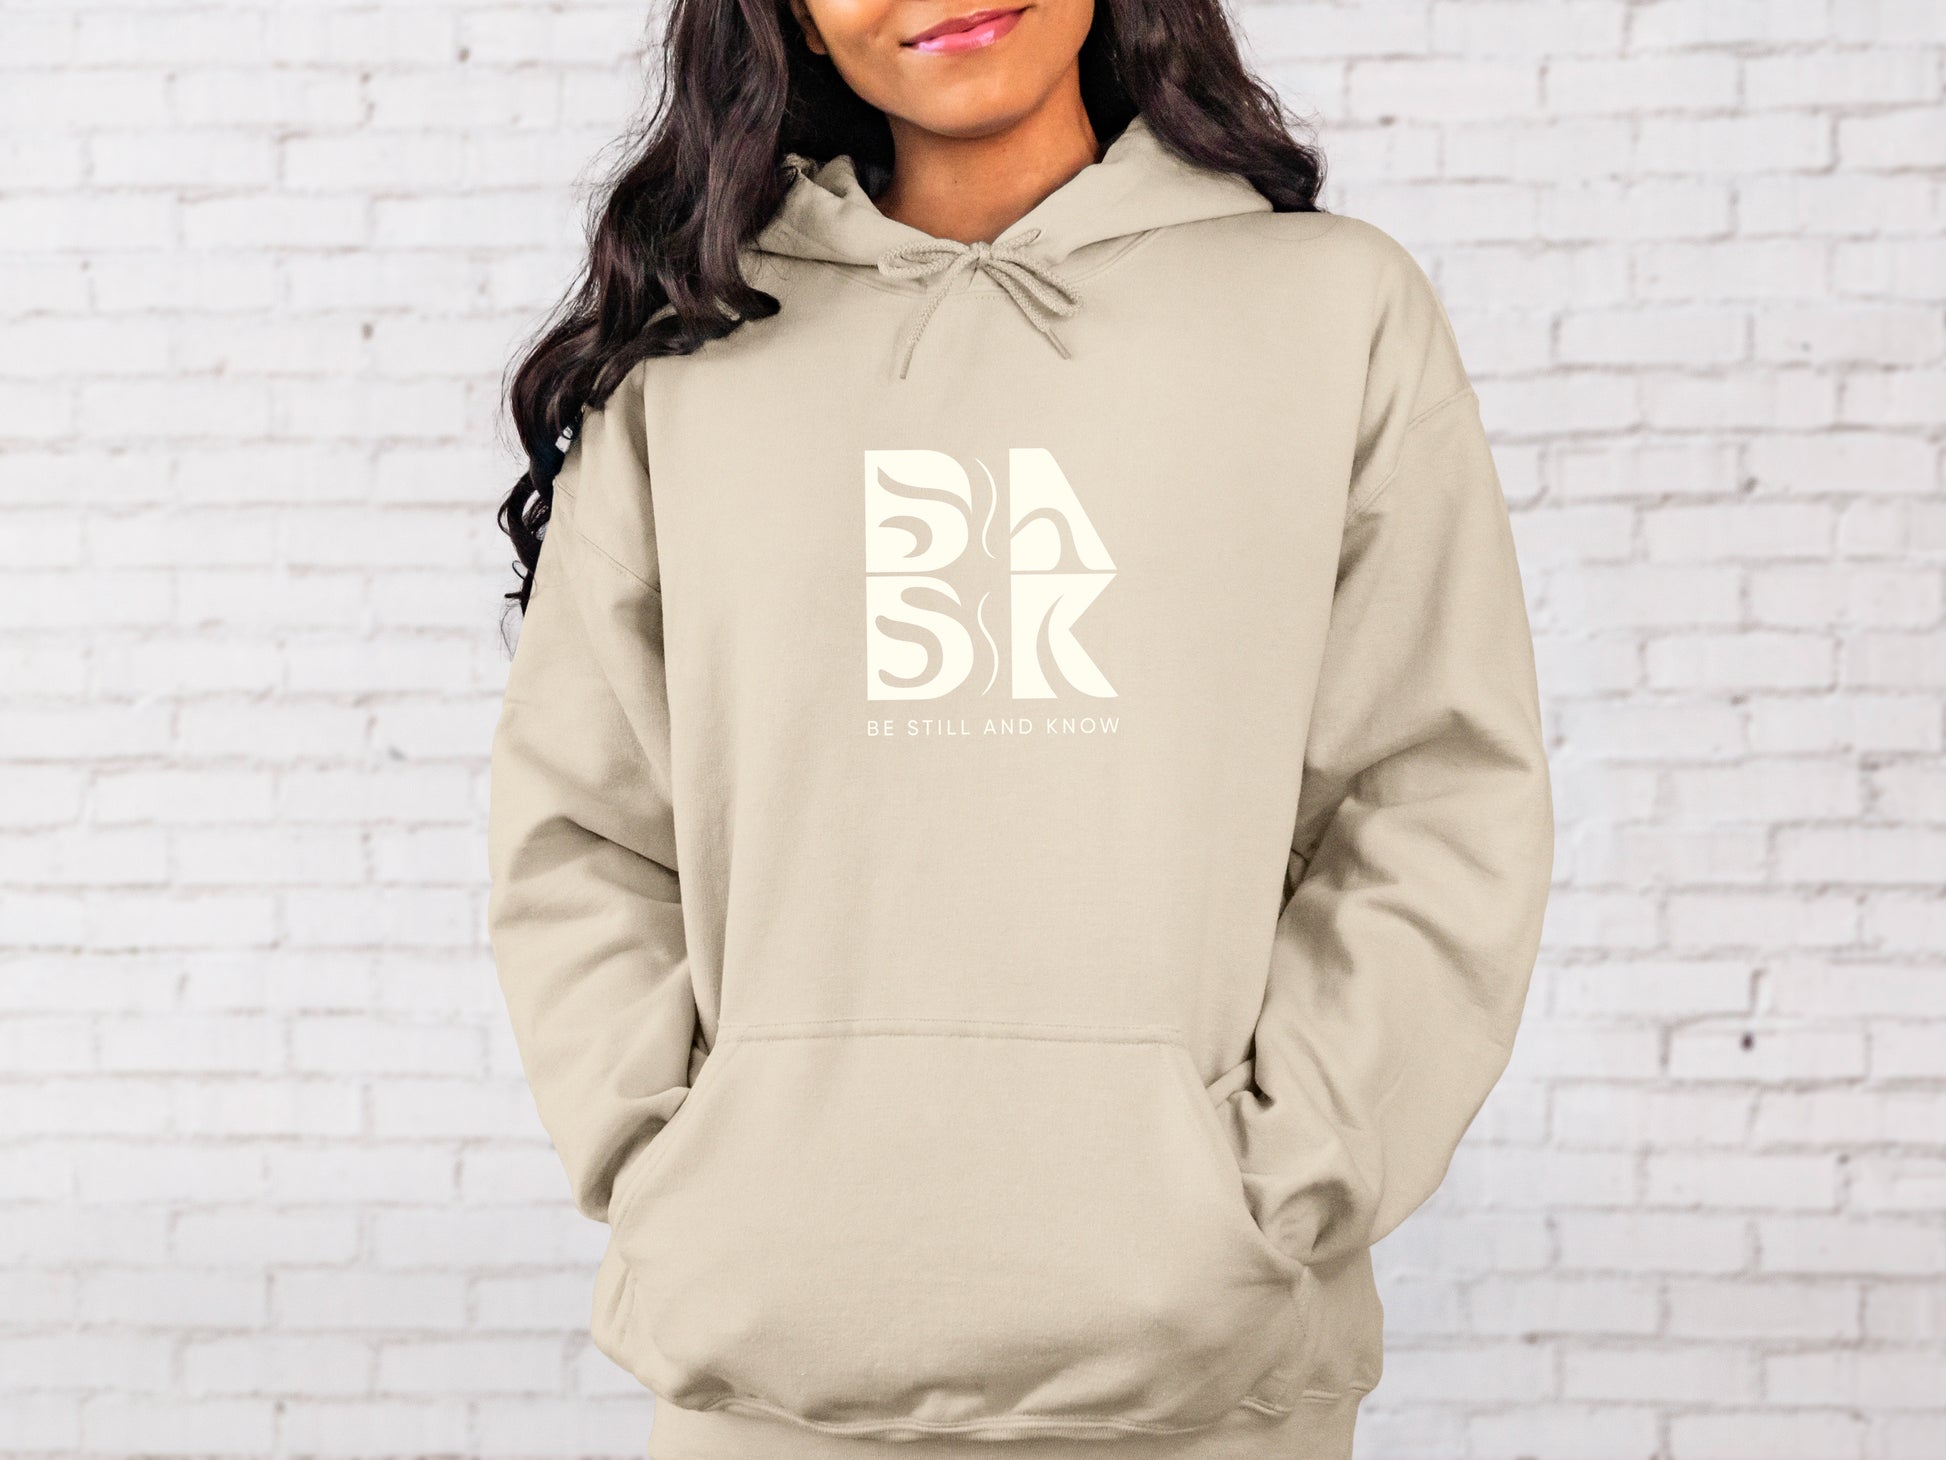 A woman wearing a Coastal Calm Hoodie in Sand with the Be Still and Know logo on it.